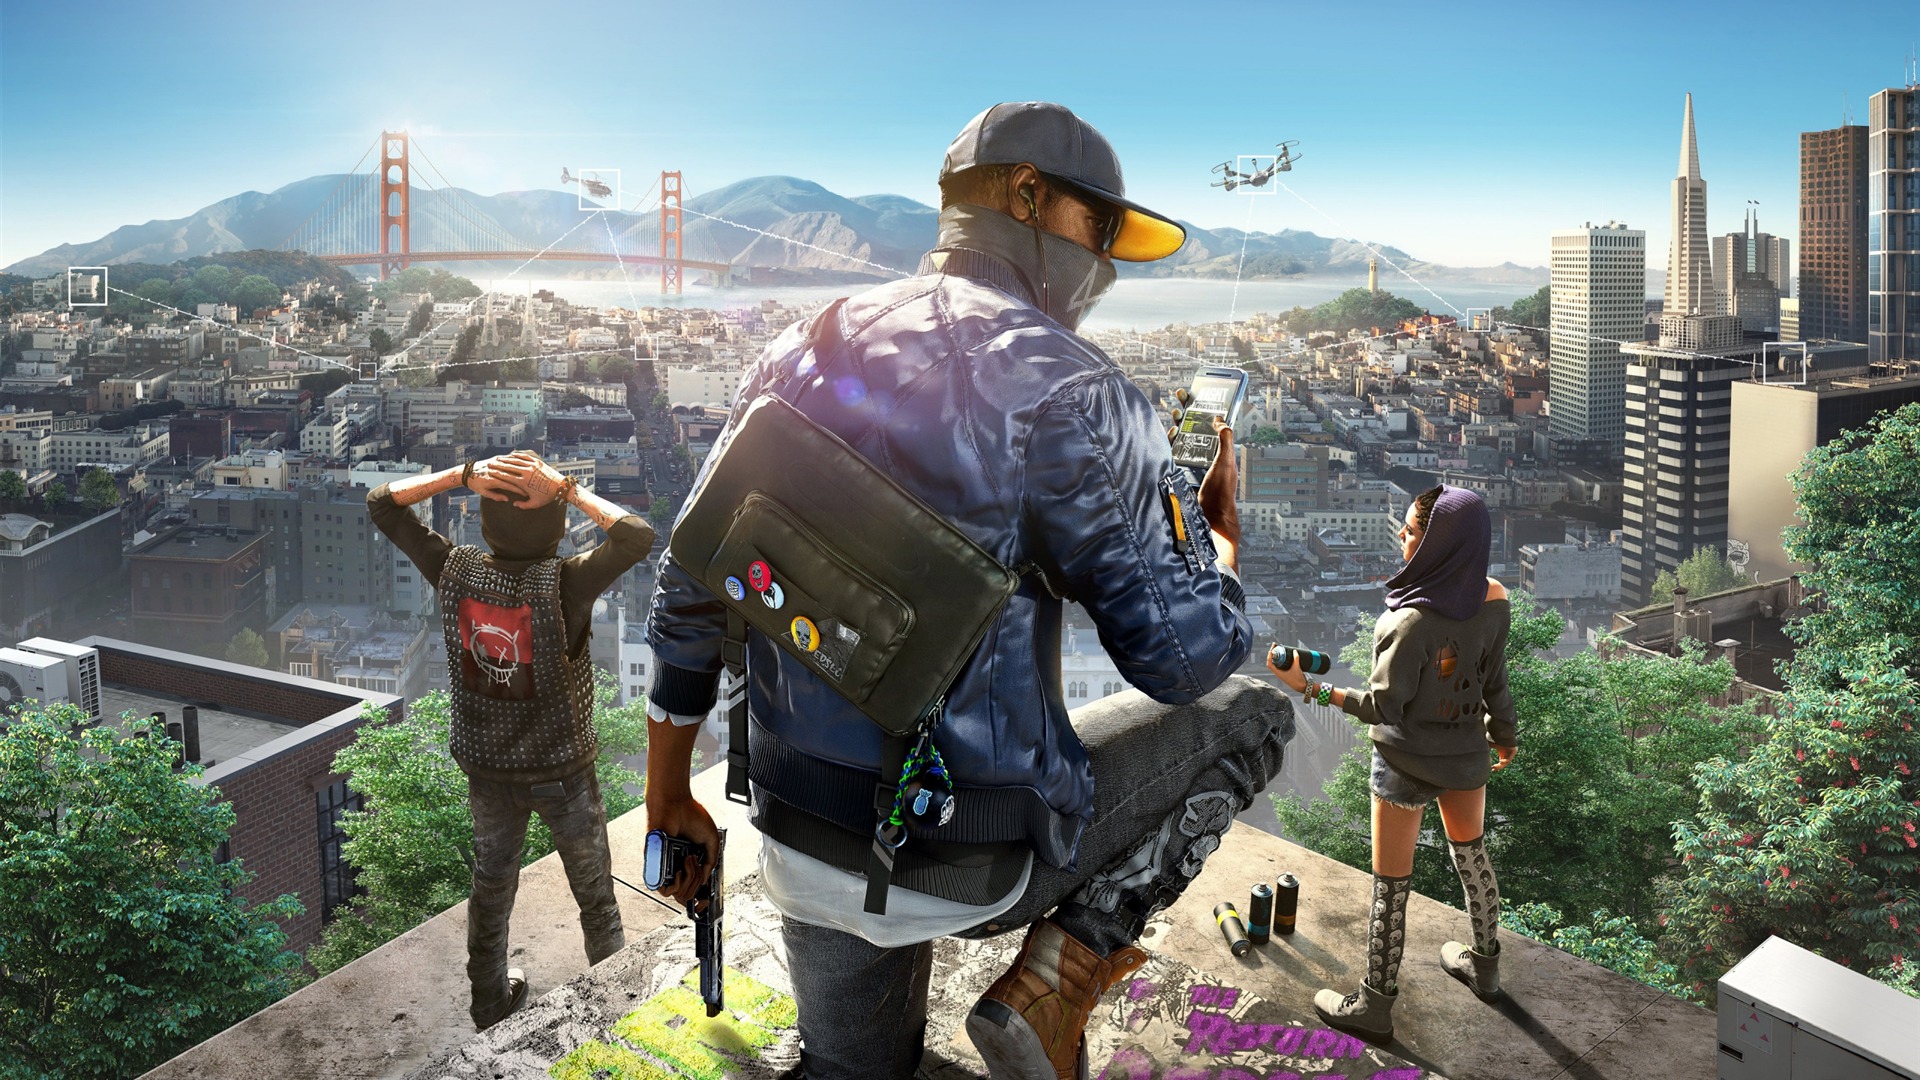 Free games: Watch Dogs 2 and Killing Floor 2 are the choices of the week for the PC